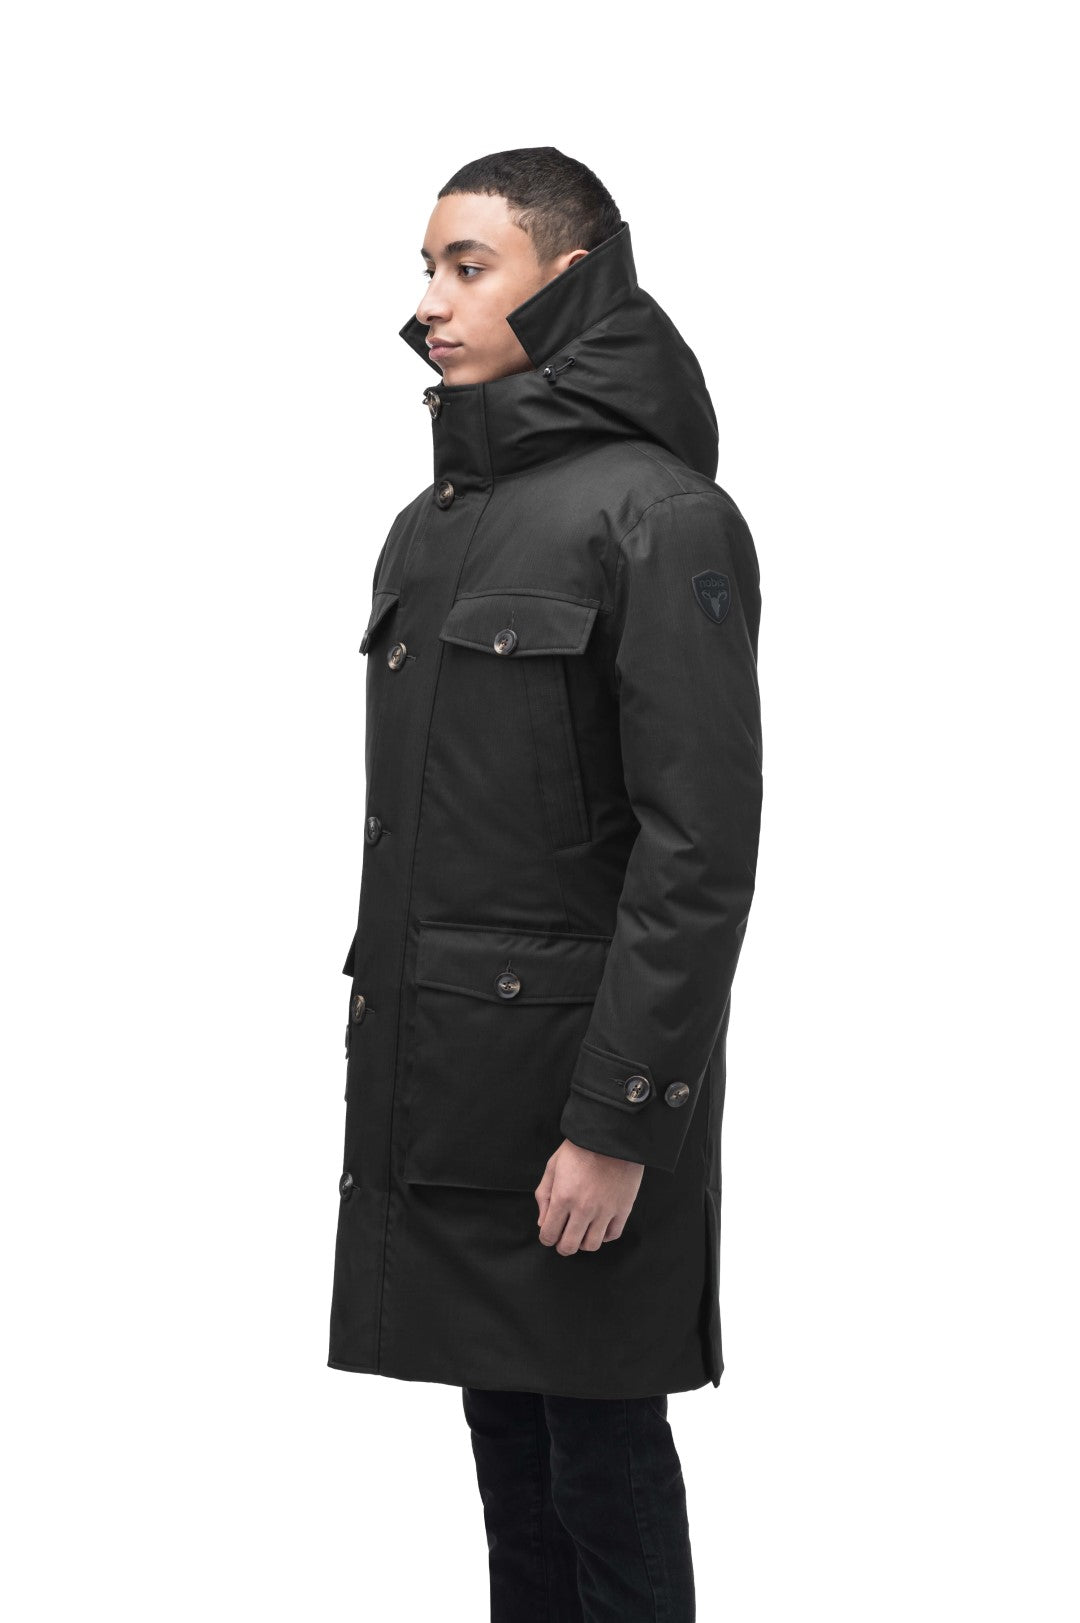 Citizen Men's Tailored Parka in knee length, Canadian duck down insulation, non-removable hood, and two-way zipper, in Black